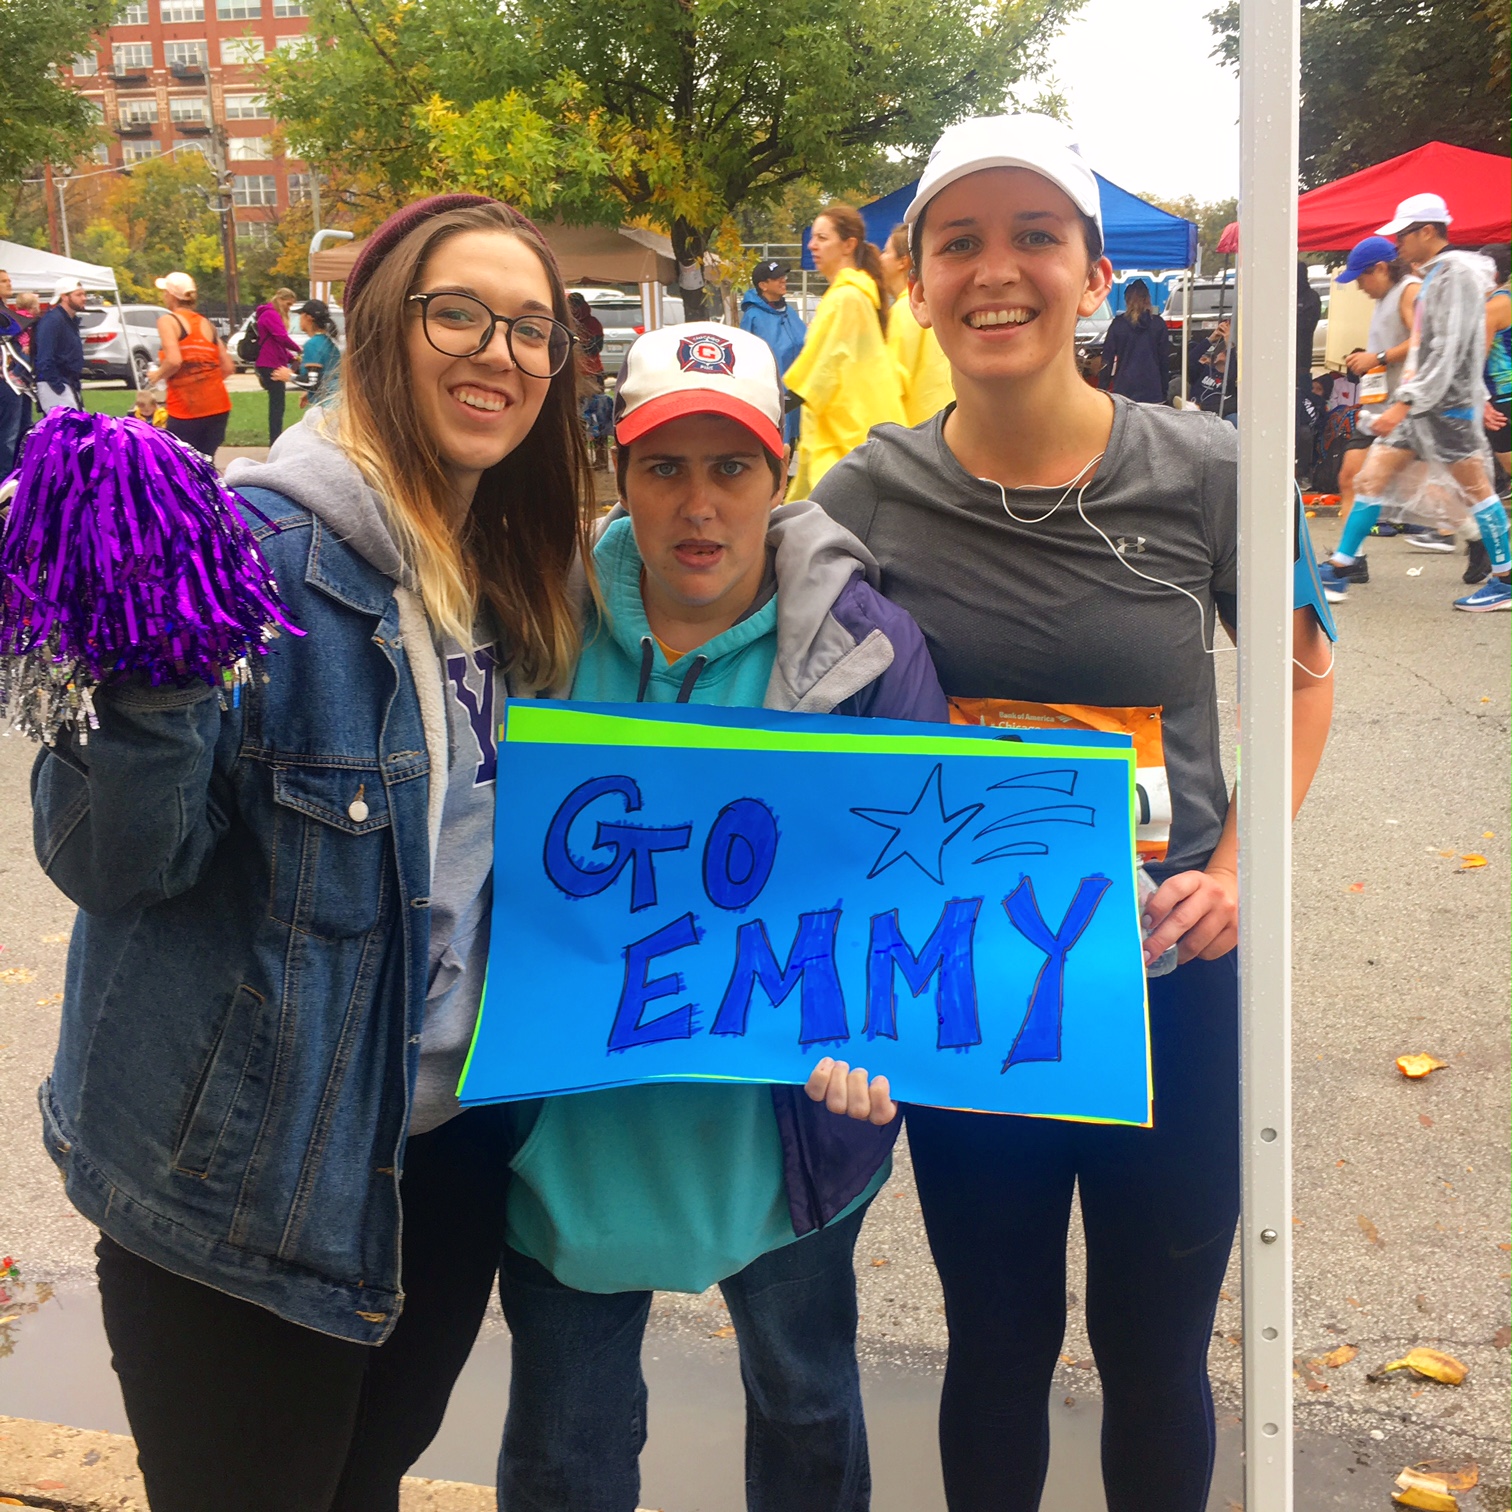 A runner, a participant, and a supporter pose on the Chicago Marathon course